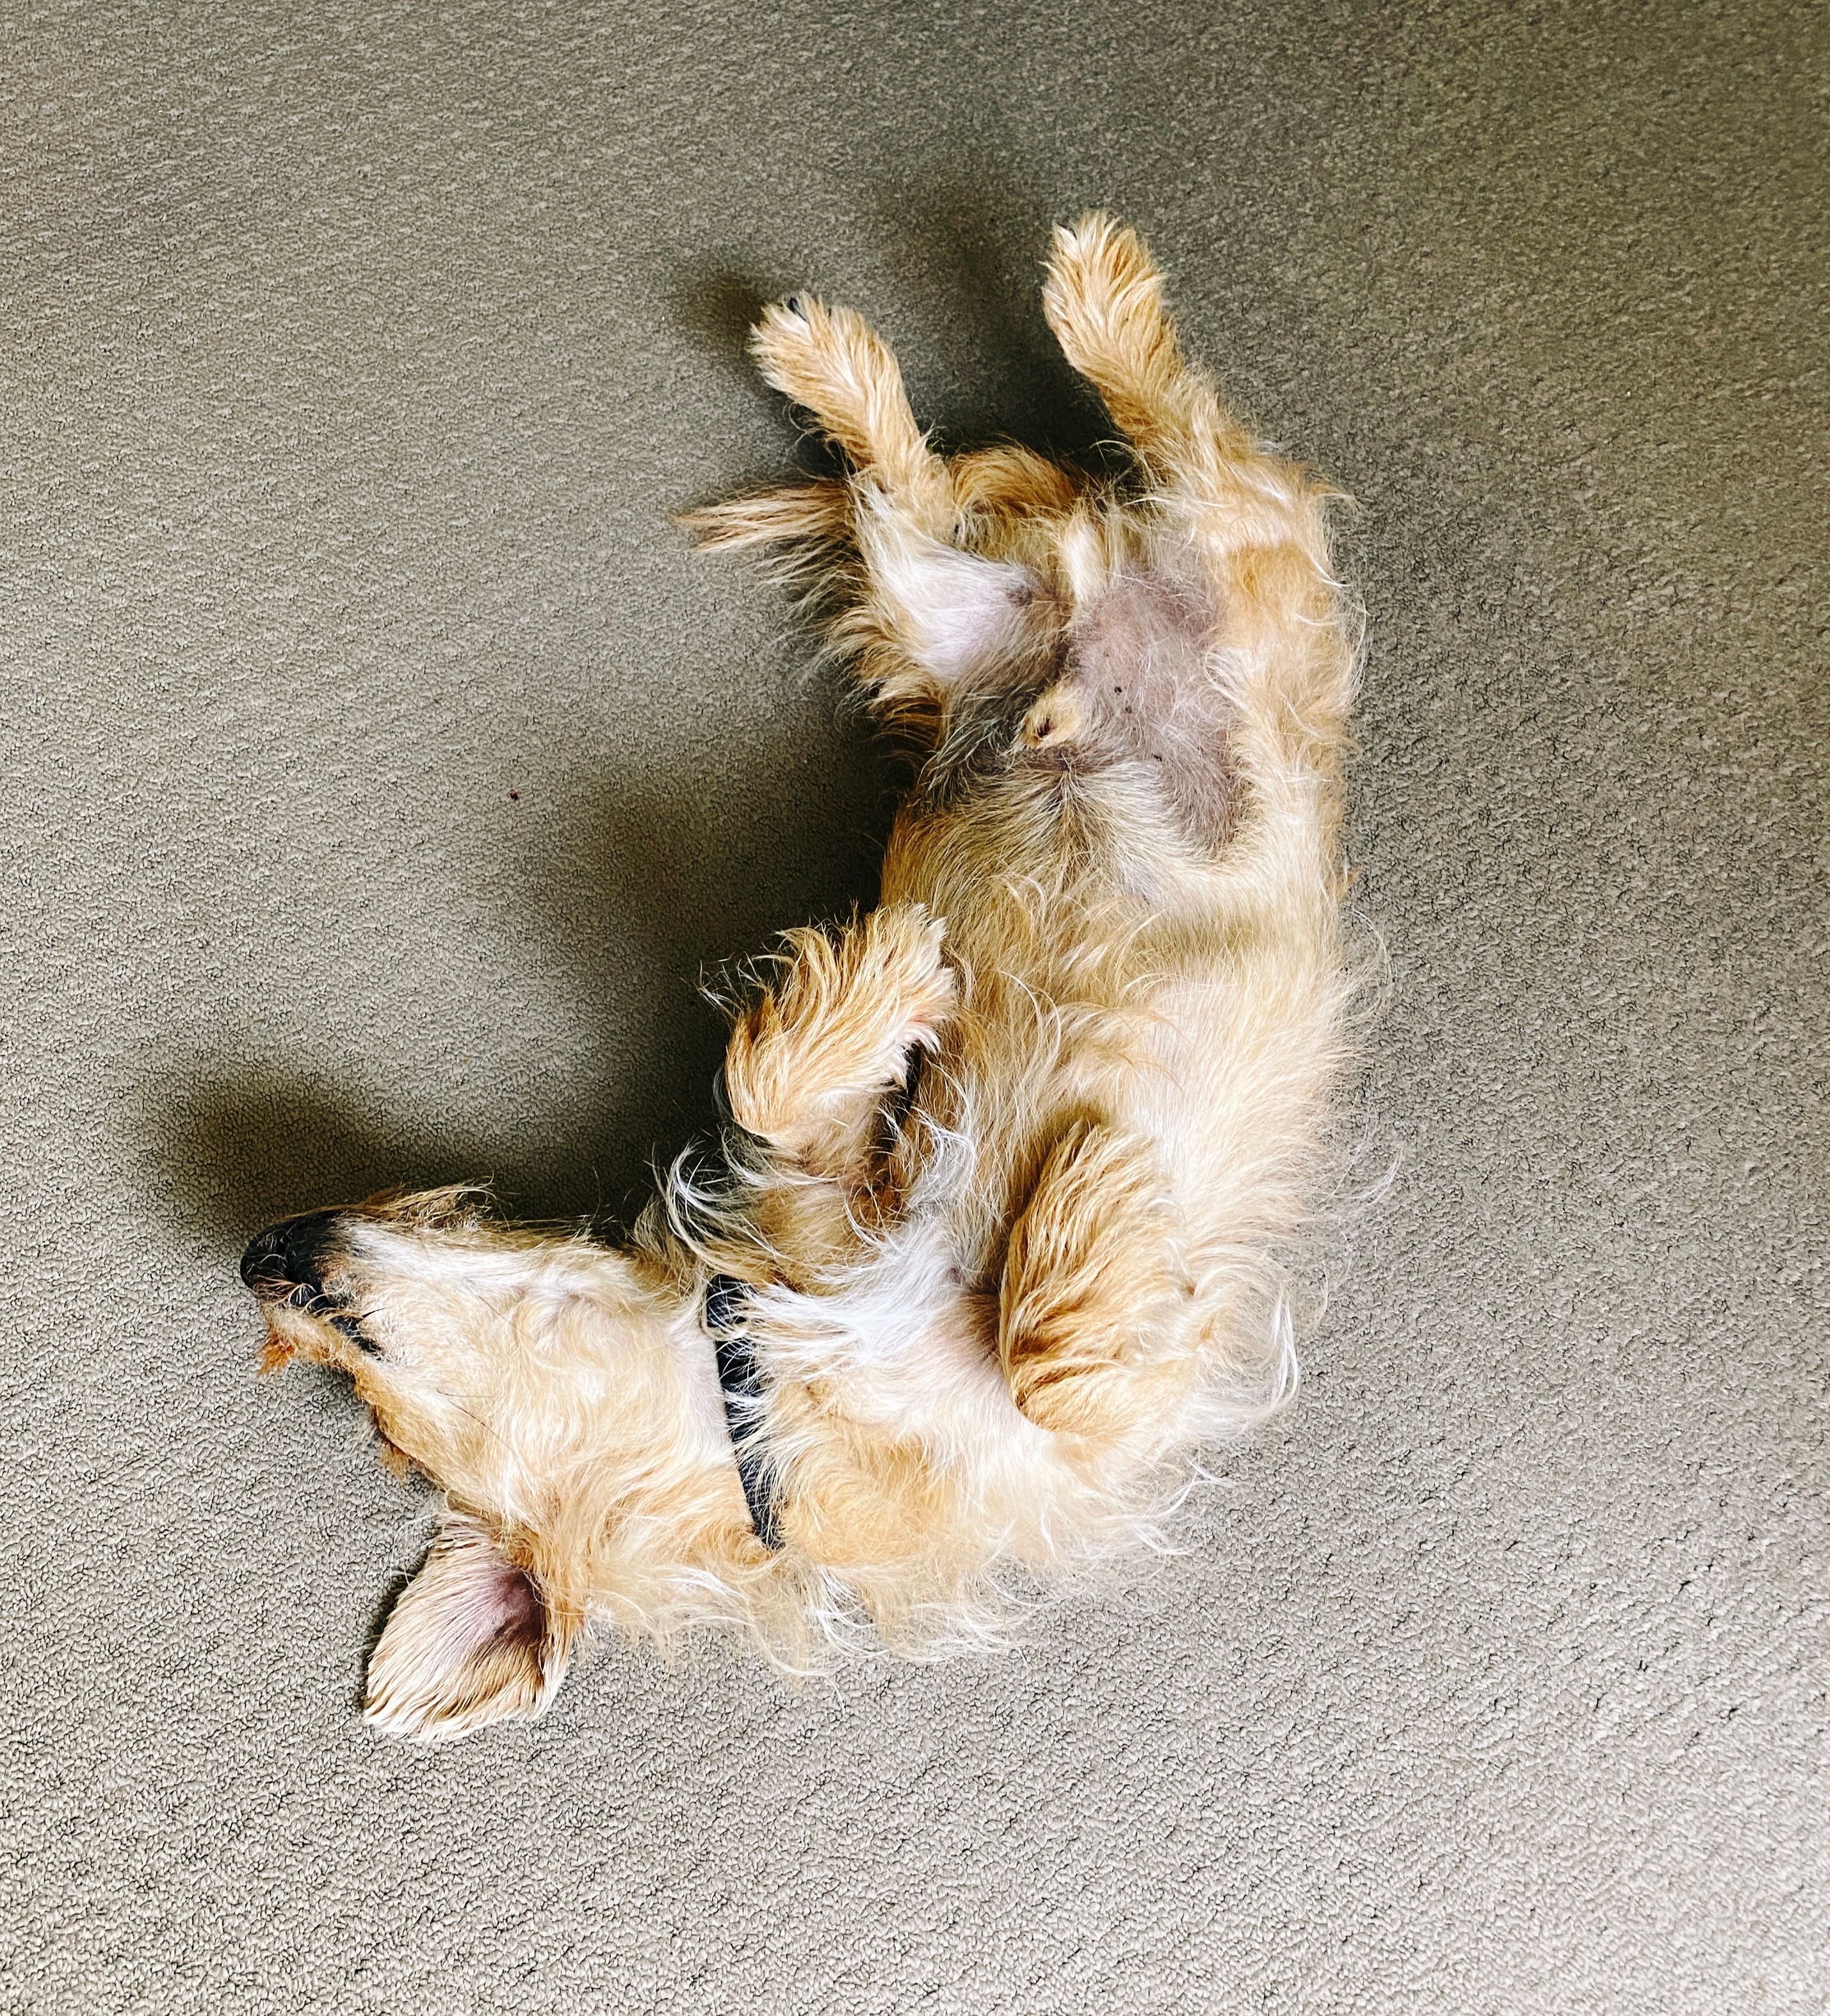 A photo of a small scruffy blonde dog lying upside-down on the floor with his legs in the air.